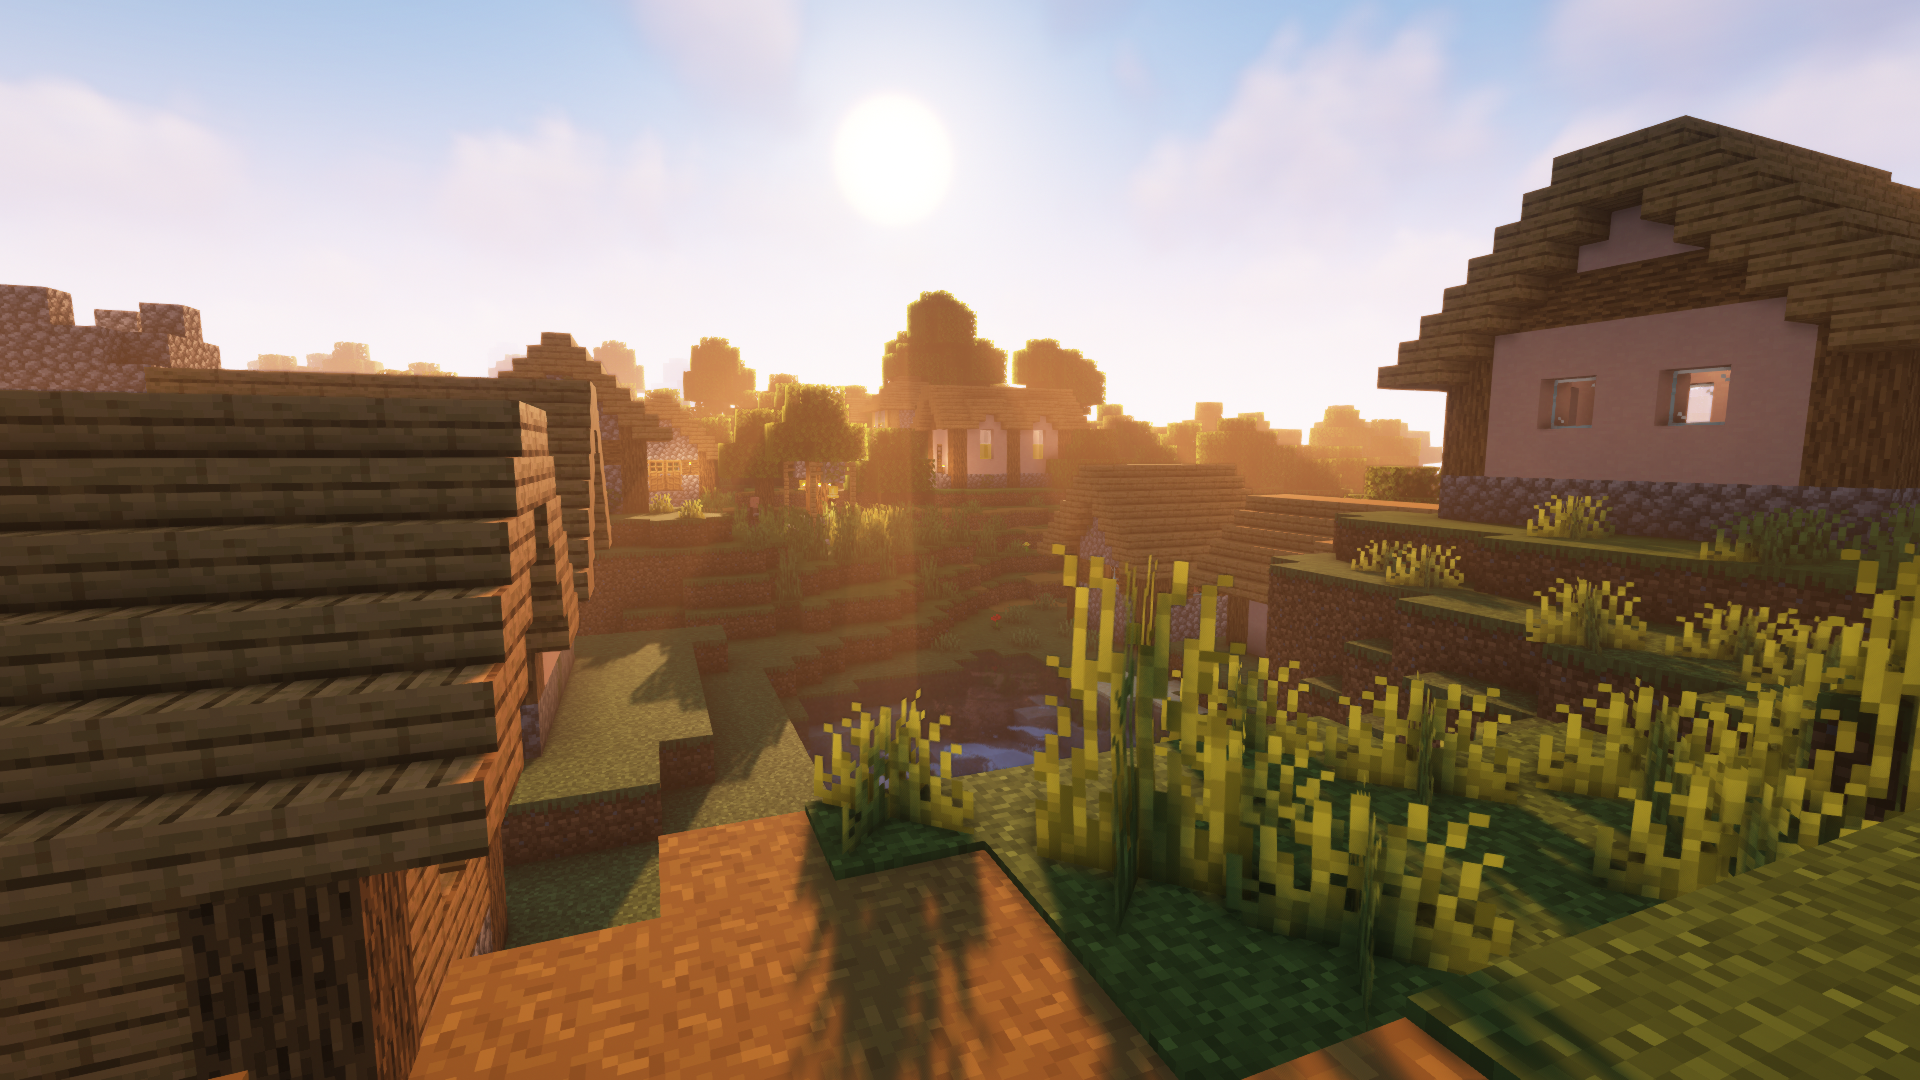 General 1920x1080 Minecraft shaders Aestheticc Meme video games house Mojang